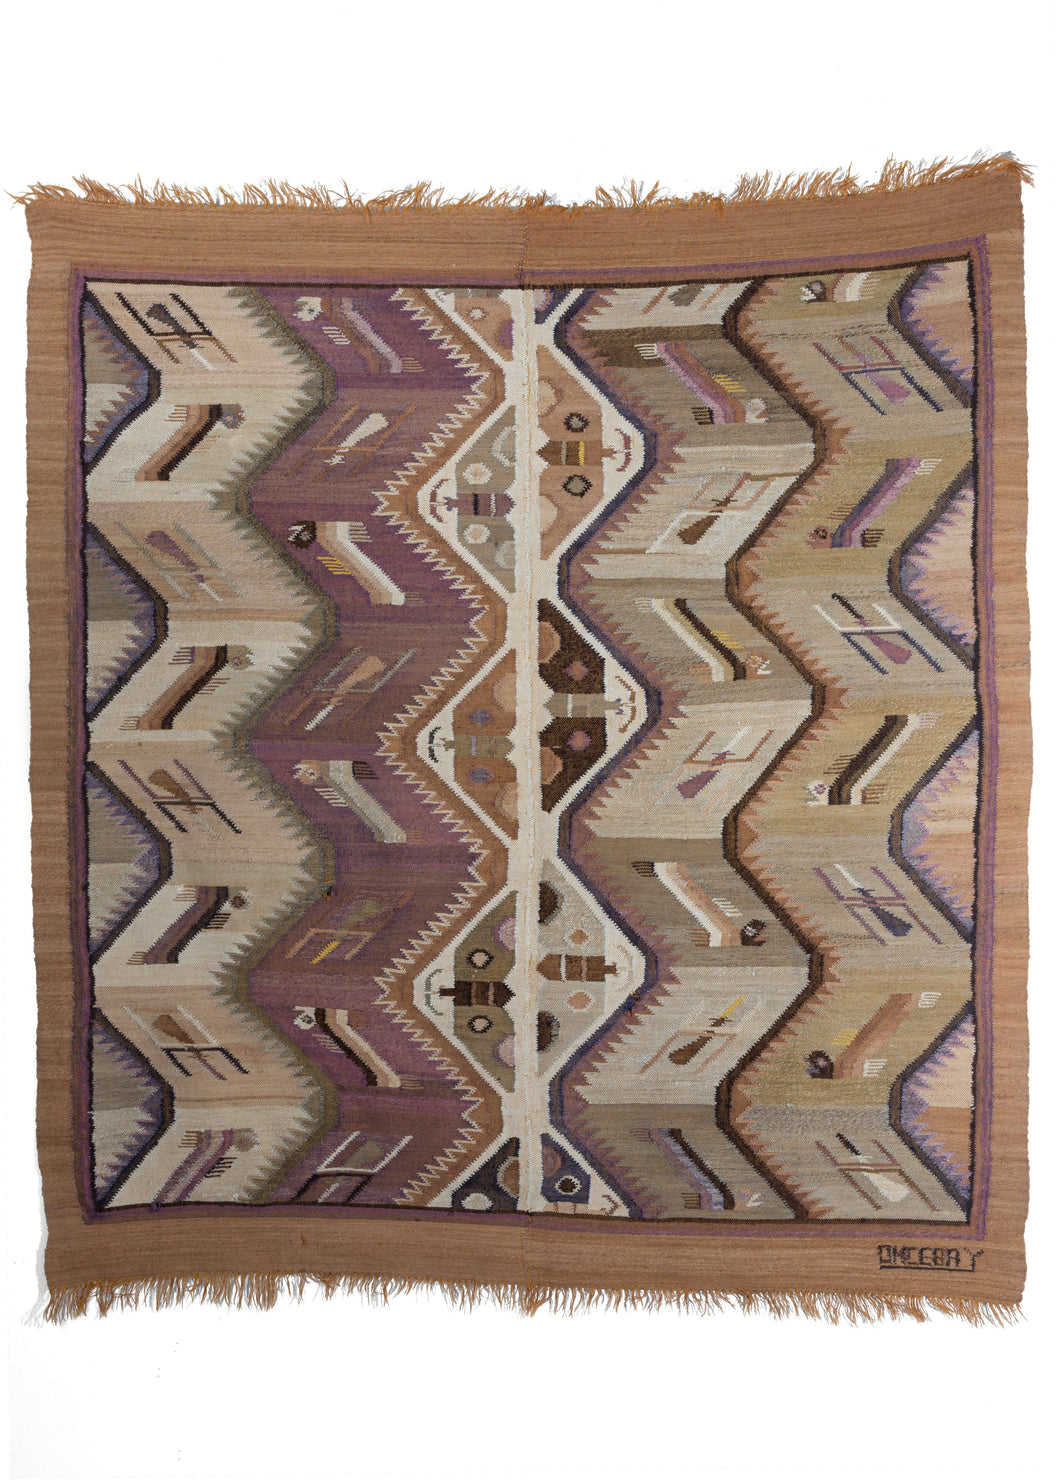 Signed Saturnino Oncebay Peruvian Weaver's Kilm with butterflies and caterpillars in natural dye zig zag design